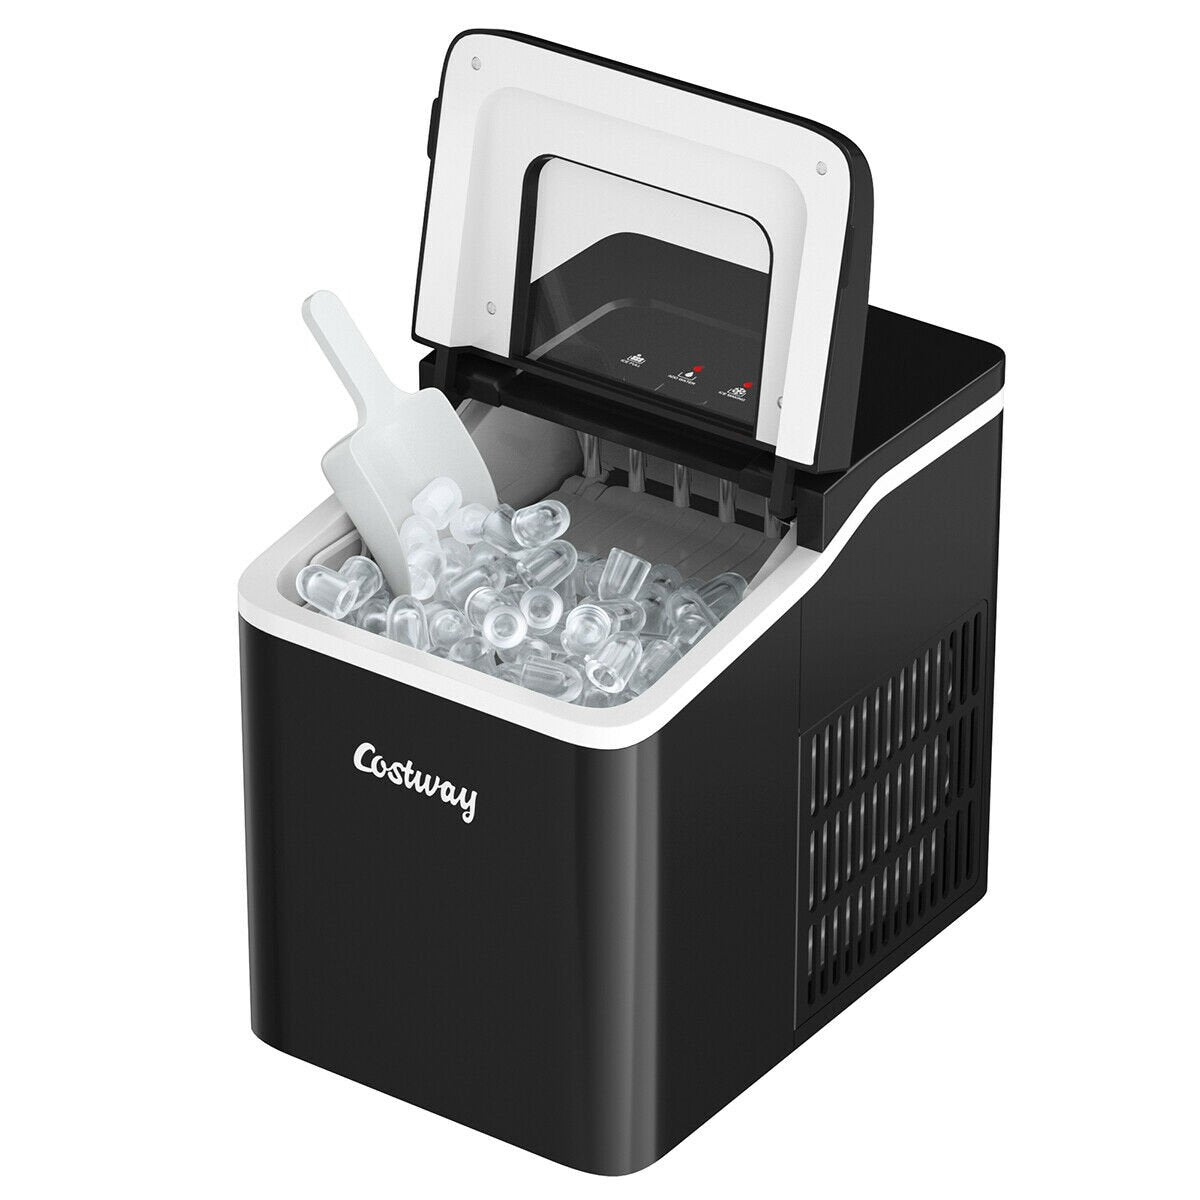 26lbs/24h Portable Countertop Ice Maker Machine with Scoop 9 Ice Cubes Ready in 8 minutes, Black